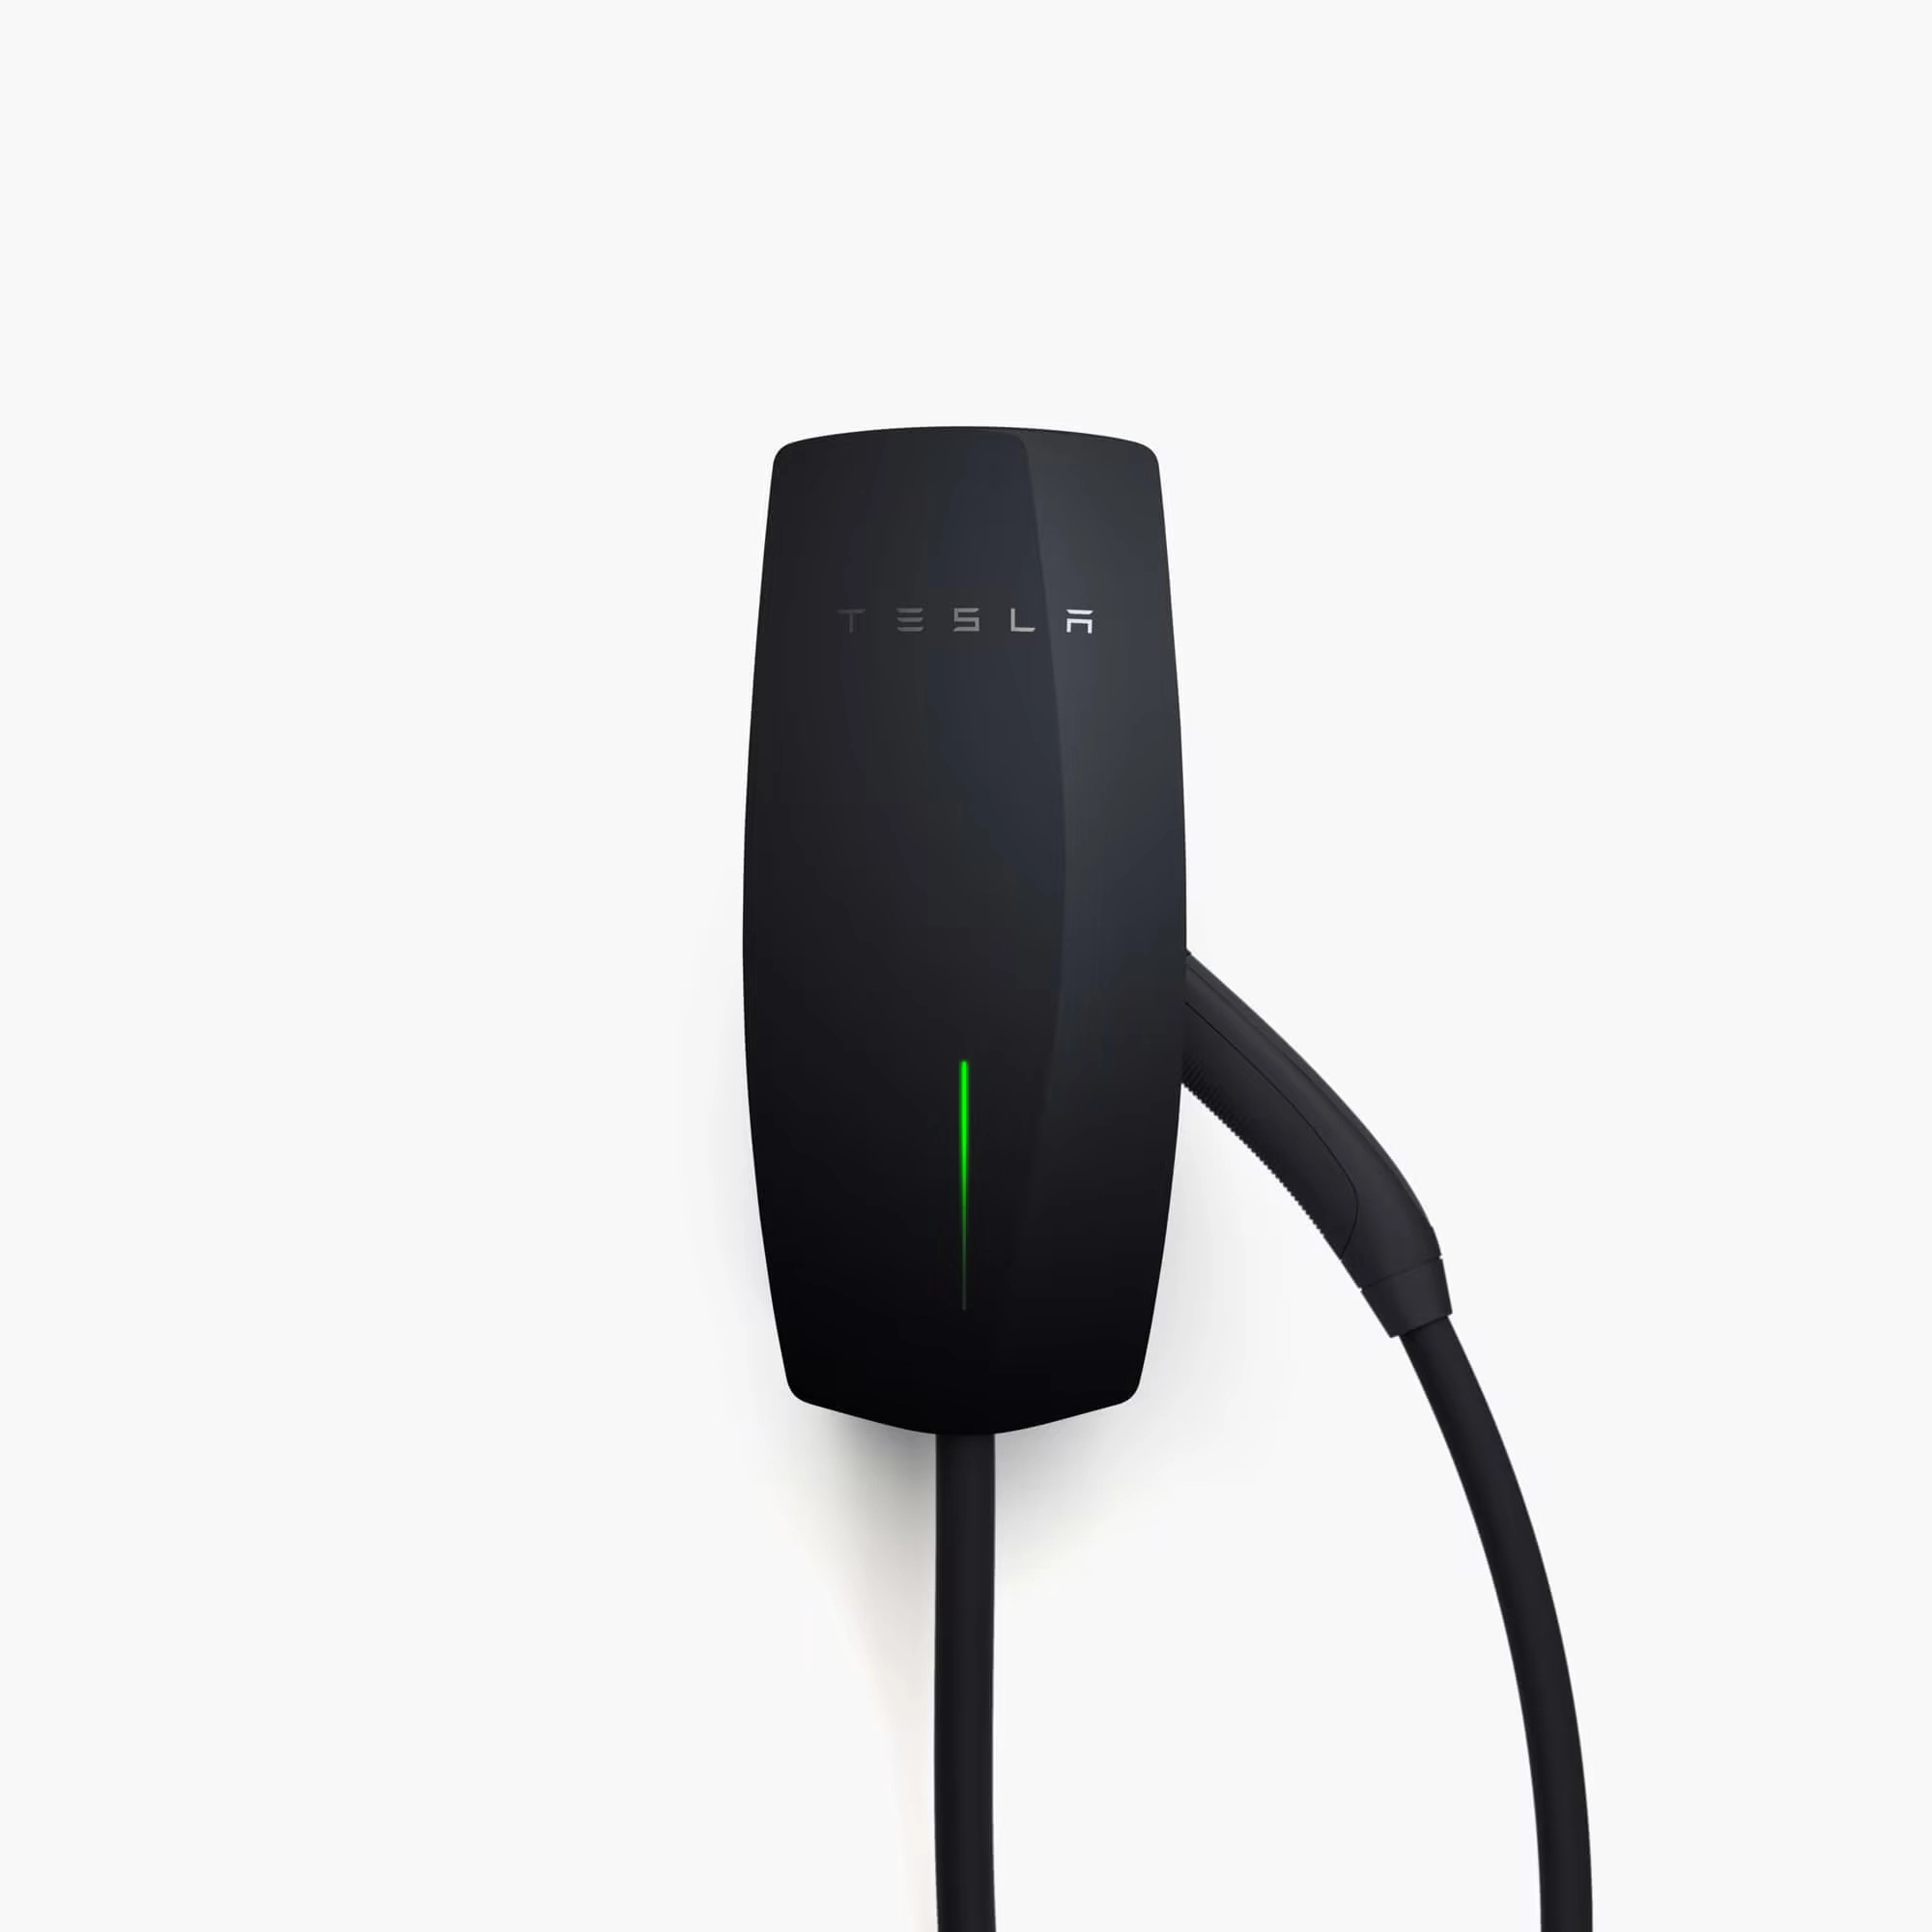 Rendered Tesla EV Charger Wall Connector Gen 3 with black faceplate image on a white background with tethered cable